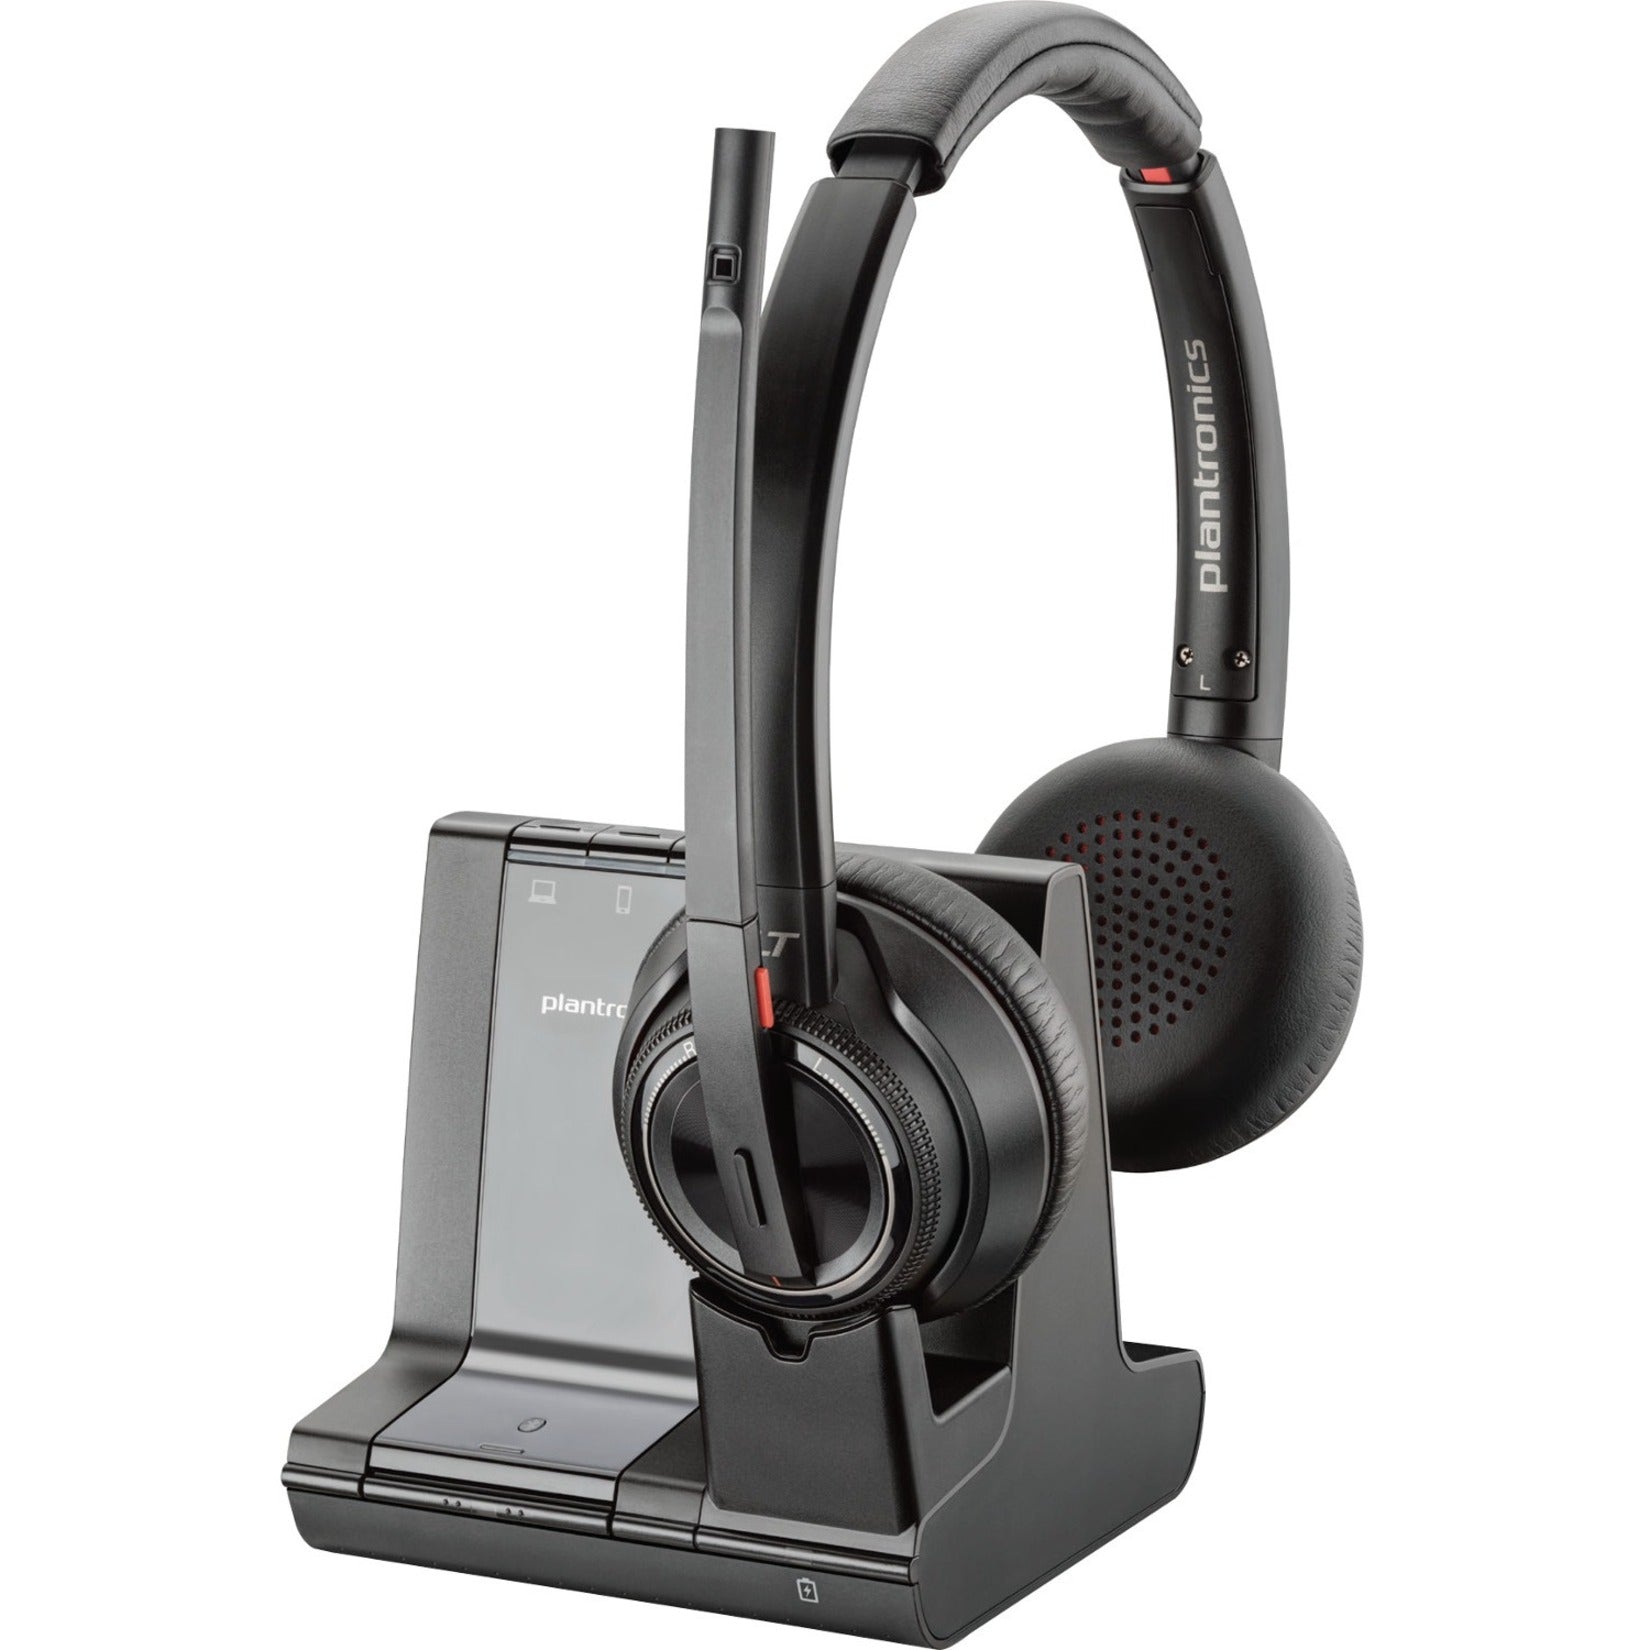 Plantronics Savi 8220 Headset - Wireless Stereo Noise Cancelling Headset [Discontinued]